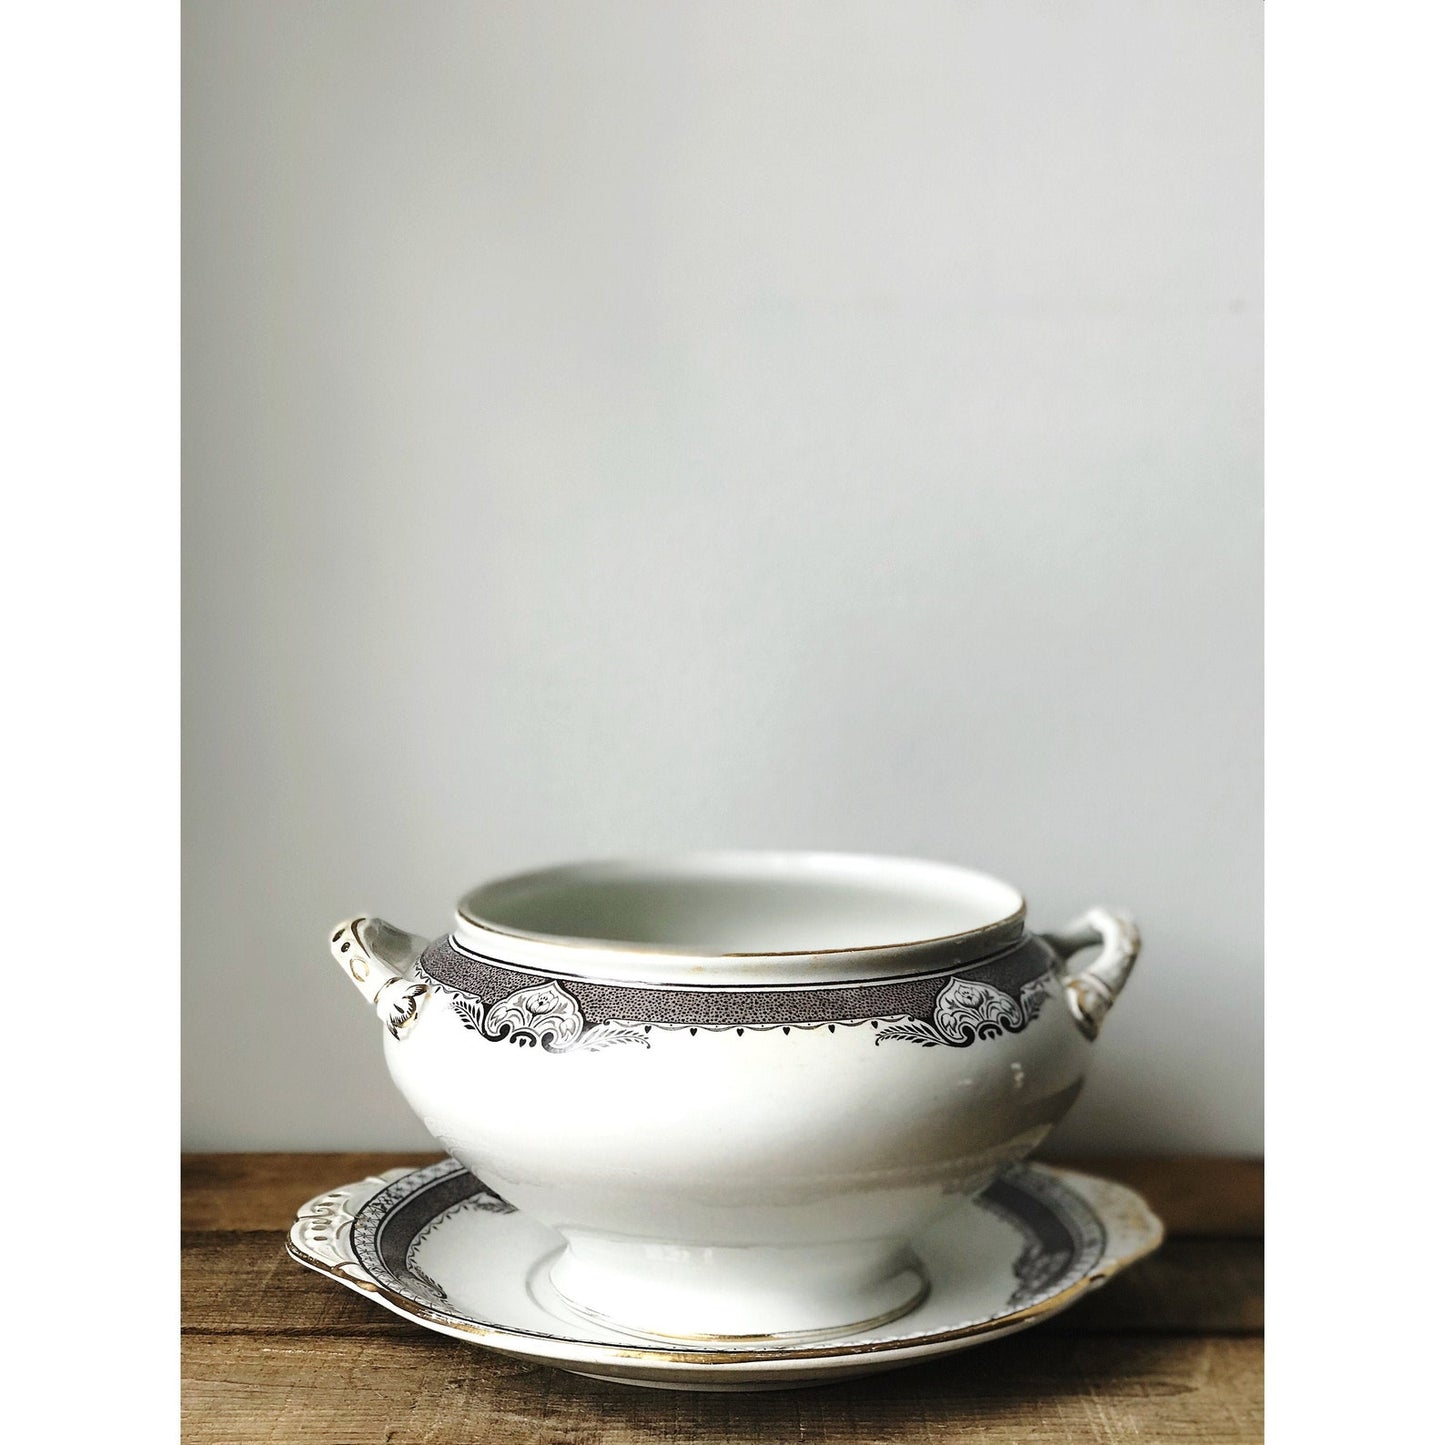 Burleighware Kenilworth Soup Tureen with Under Plate